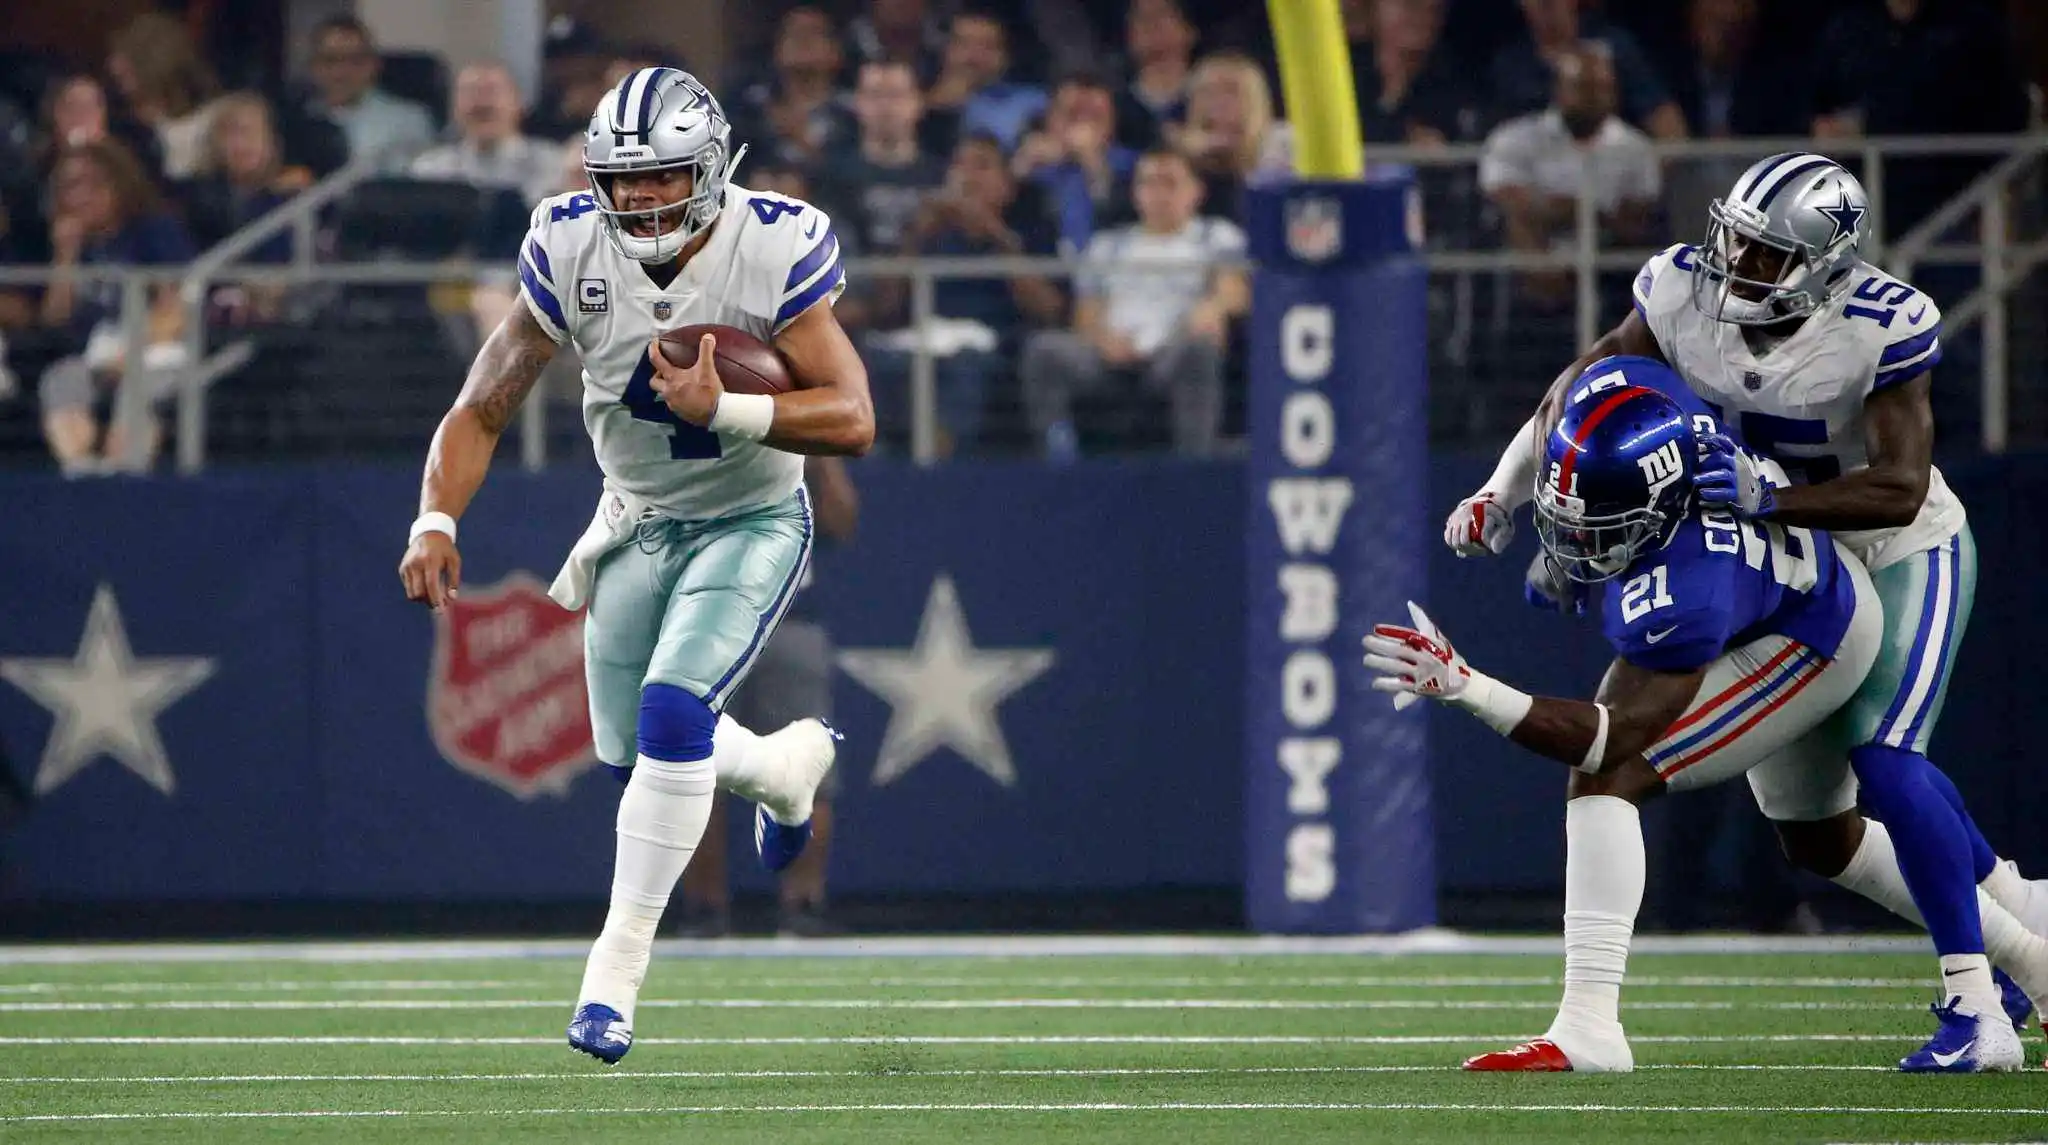 Dak Prescott's Relaxed Stance on Contract Talks Reflects a Focused Mindset